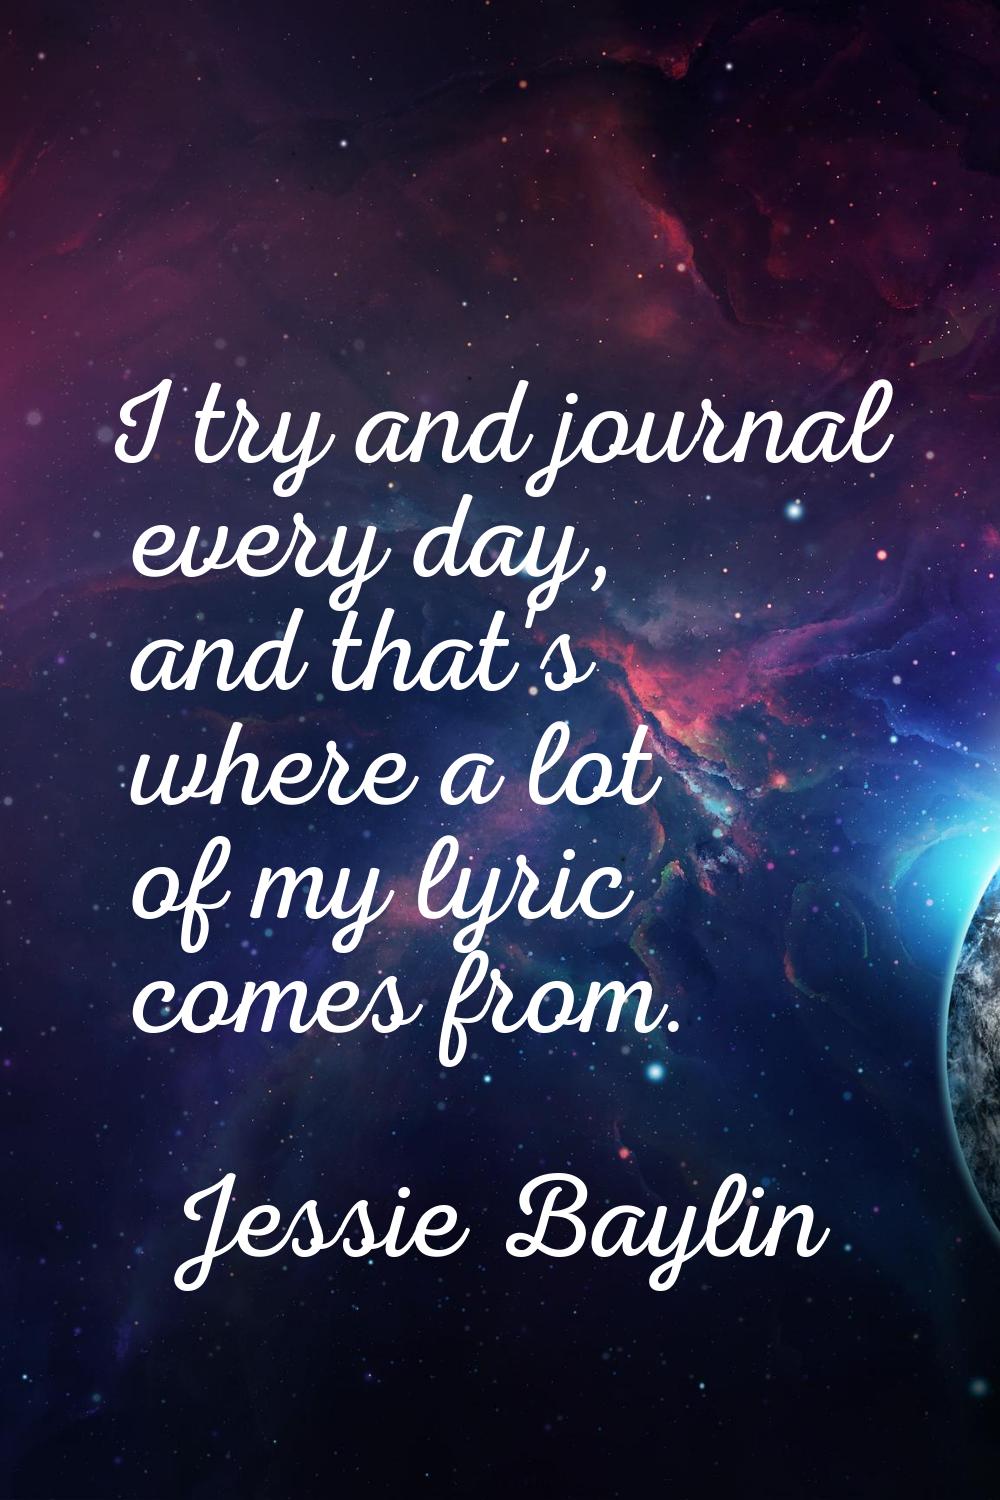 I try and journal every day, and that's where a lot of my lyric comes from.